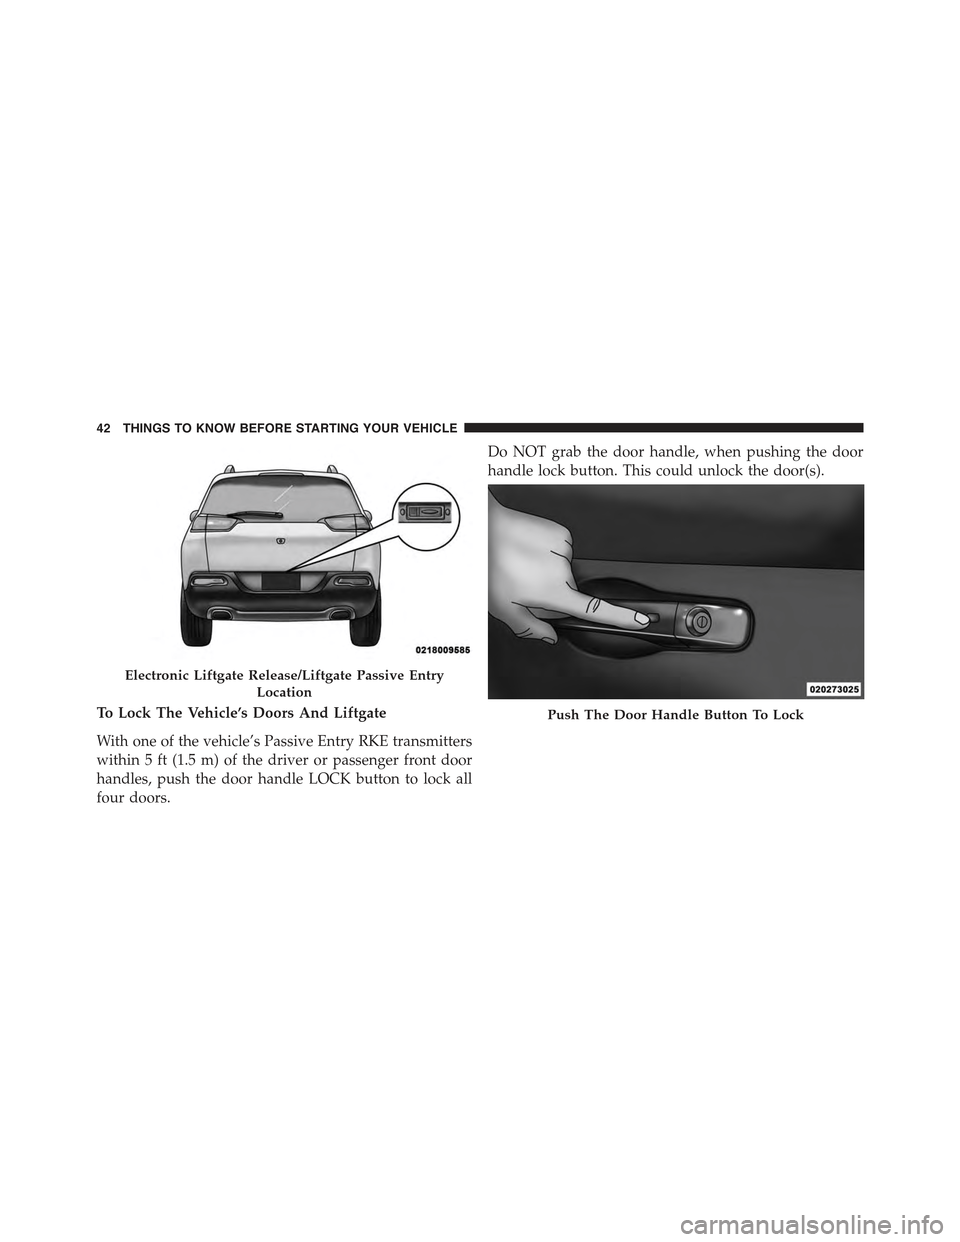 JEEP CHEROKEE 2015 KL / 5.G Service Manual To Lock The Vehicle’s Doors And Liftgate
With one of the vehicle’s Passive Entry RKE transmitters
within 5 ft (1.5 m) of the driver or passenger front door
handles, push the door handle LOCK butto